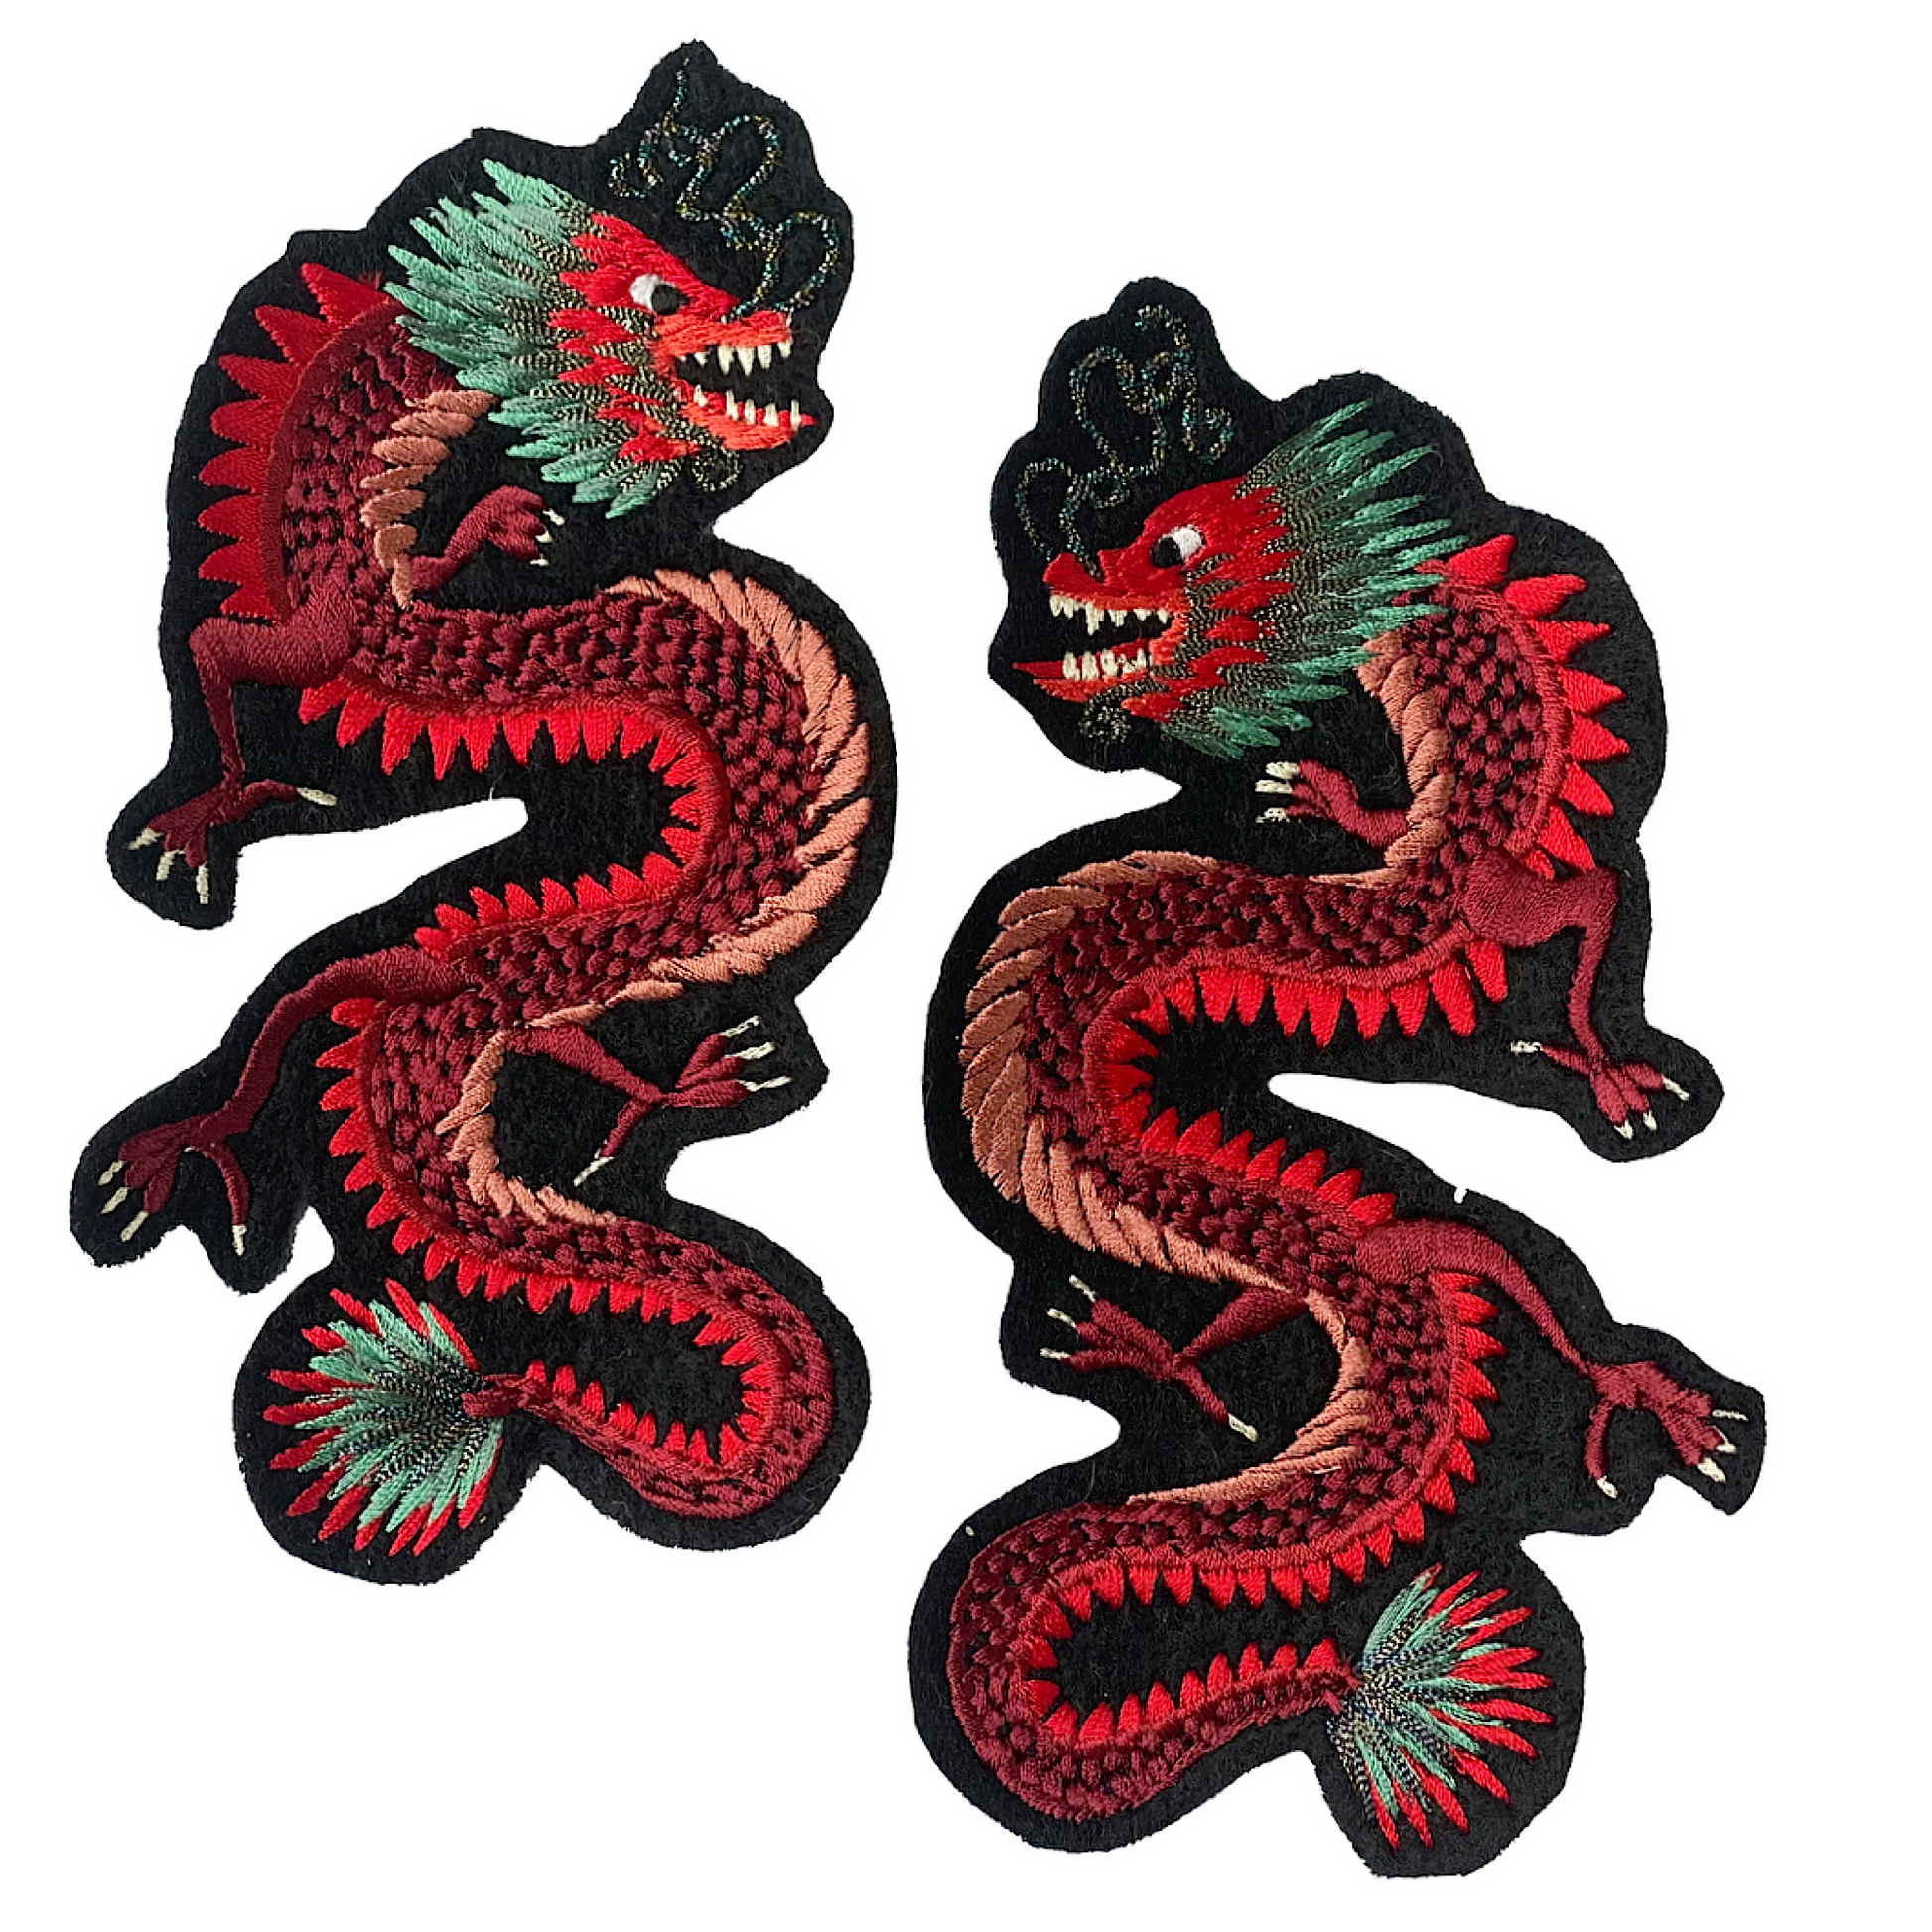 Pair of dragon embroidered patches on white background